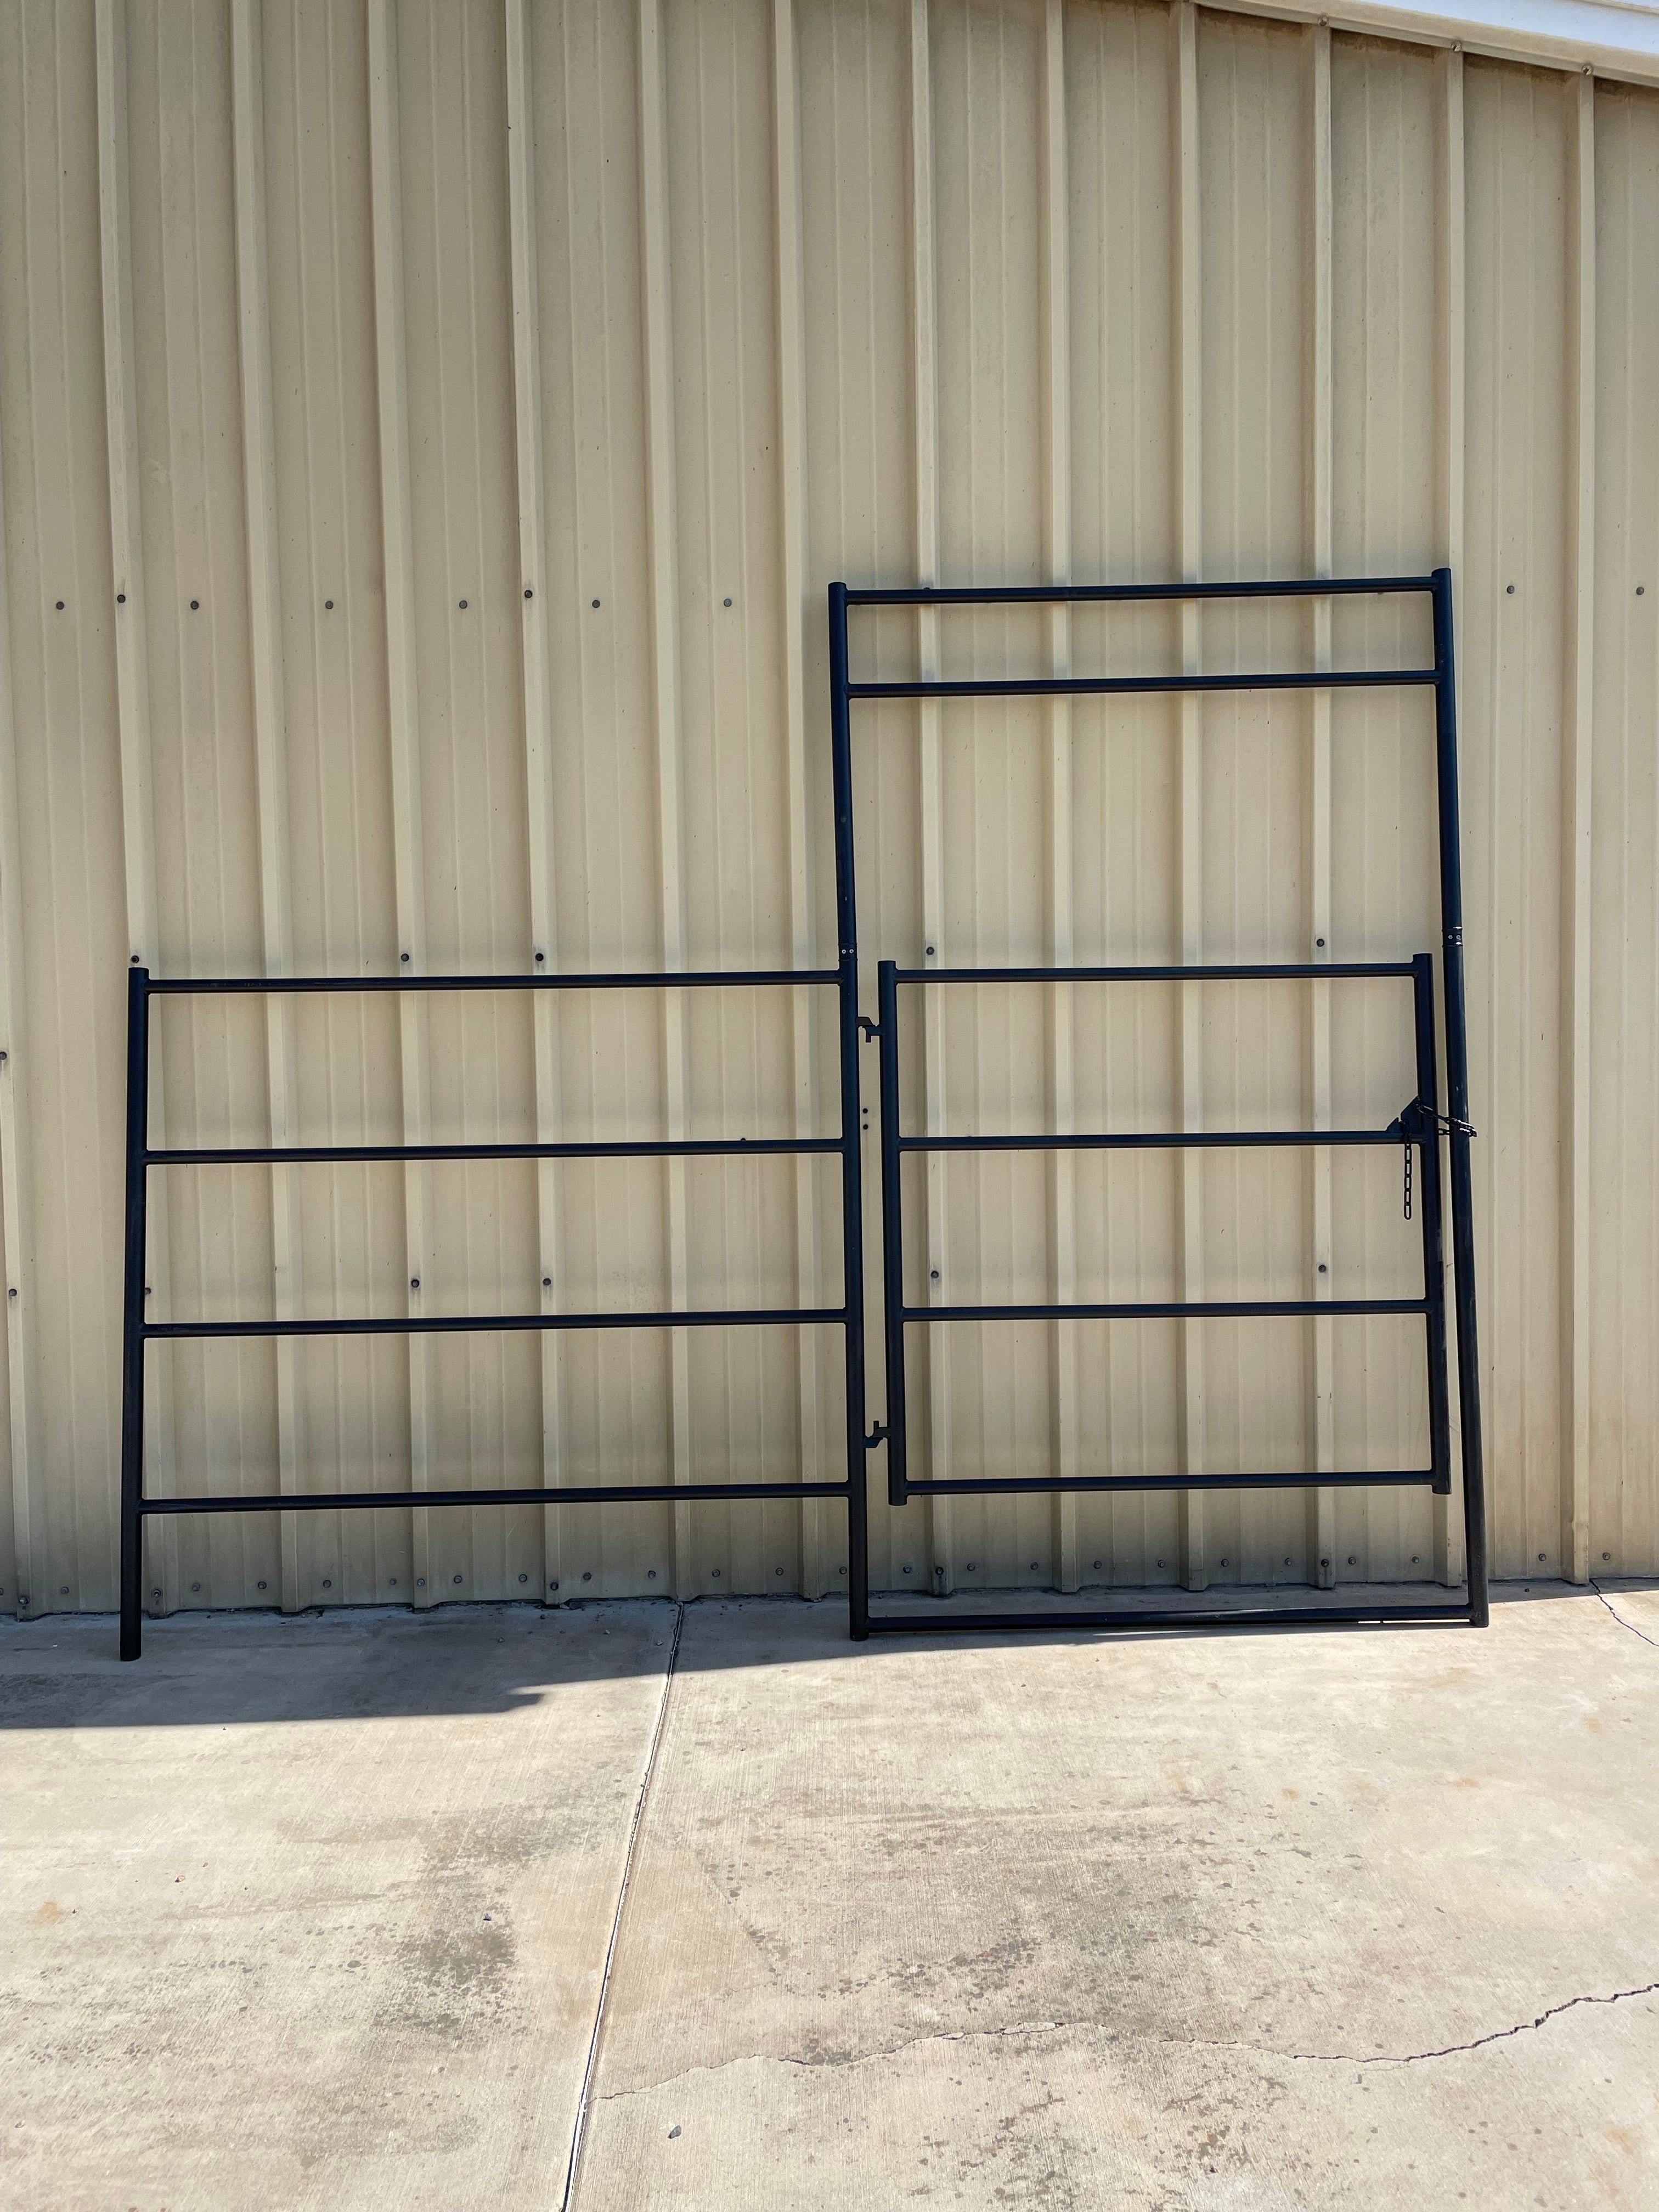 Two 10 Ft X 20 Ft Side by Side Stall Kit (4 Rail)